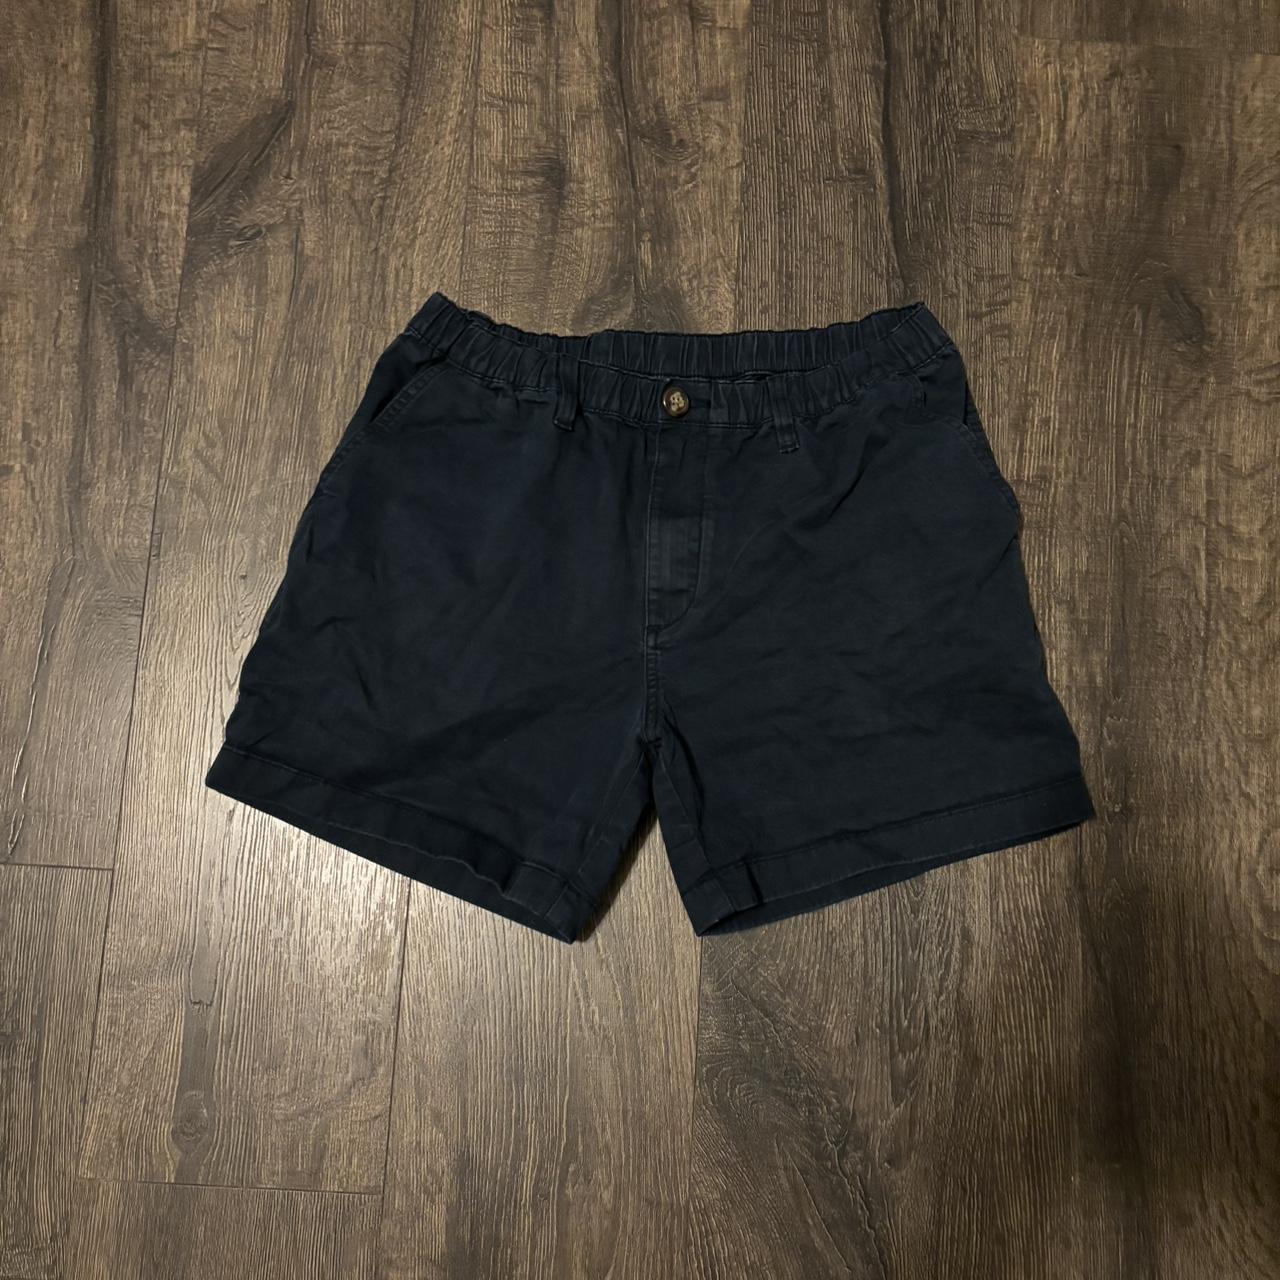 item listed by portcityfinds